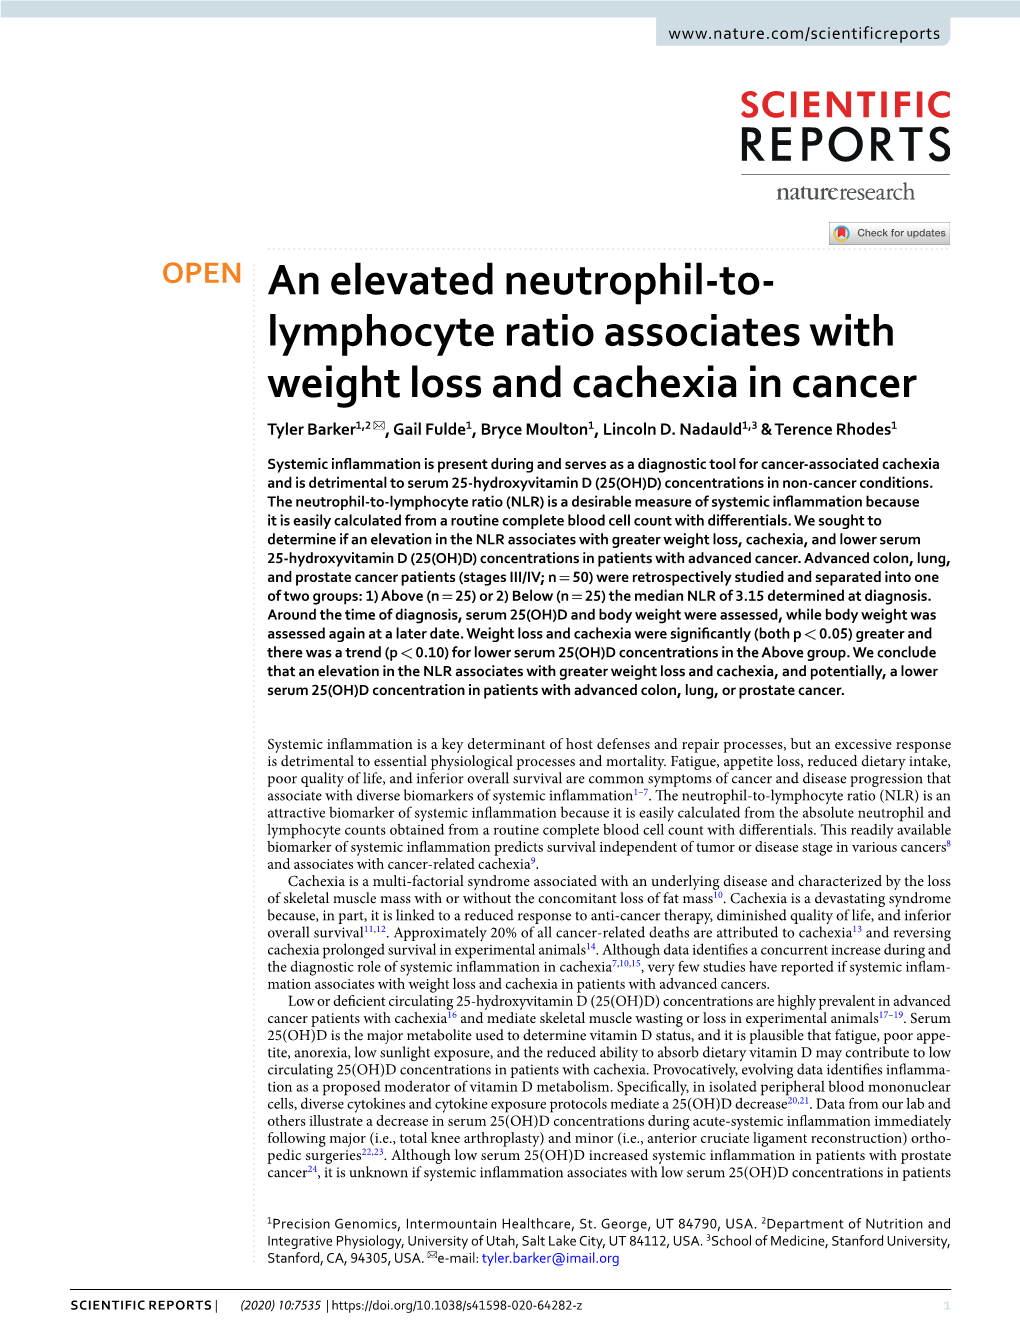 An Elevated Neutrophil-To-Lymphocyte Ratio Associates with Weight Loss